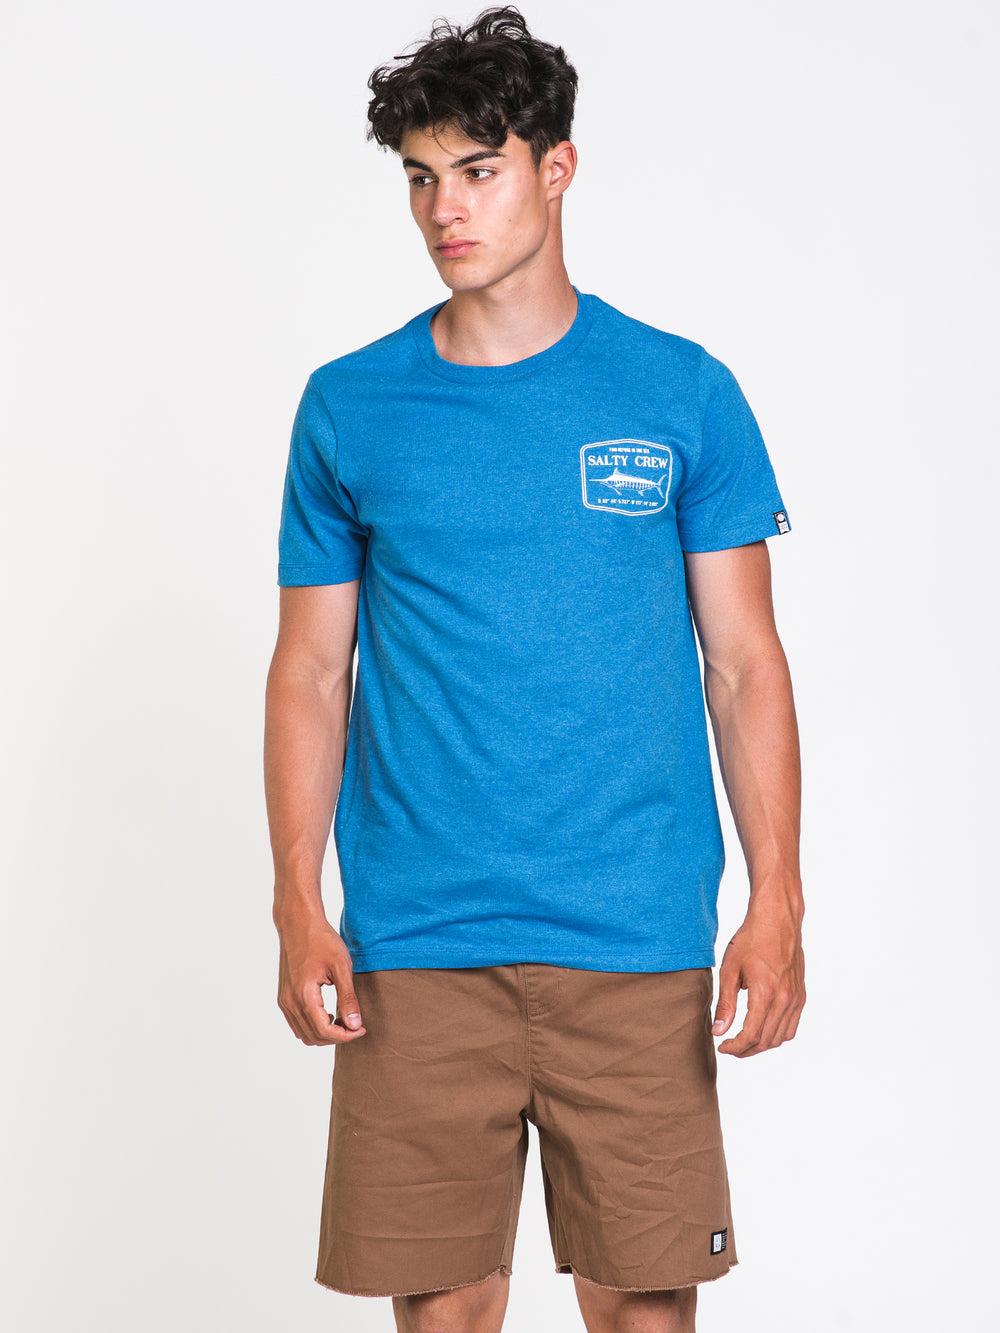 SALTY CREW STEALTH STANDARD T-SHIRT  - CLEARANCE